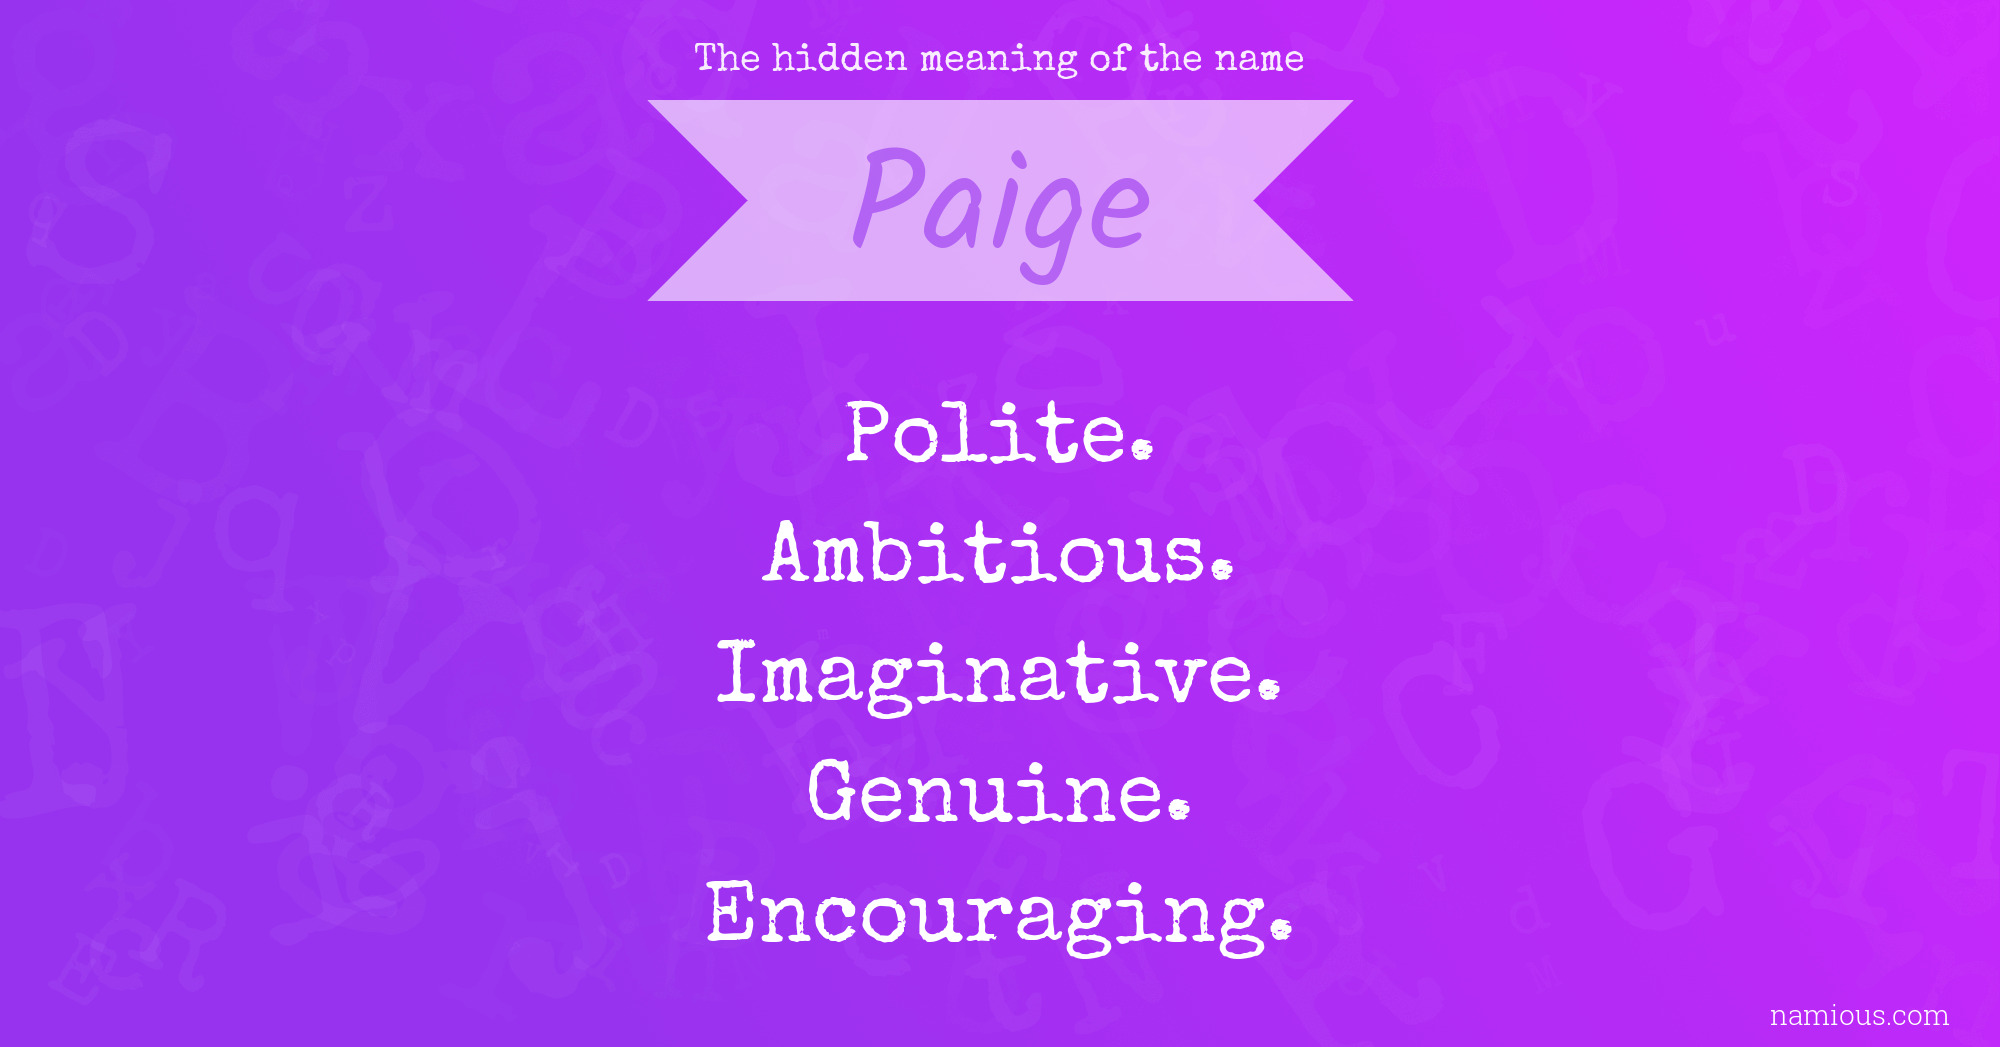 The hidden meaning of the name Paige